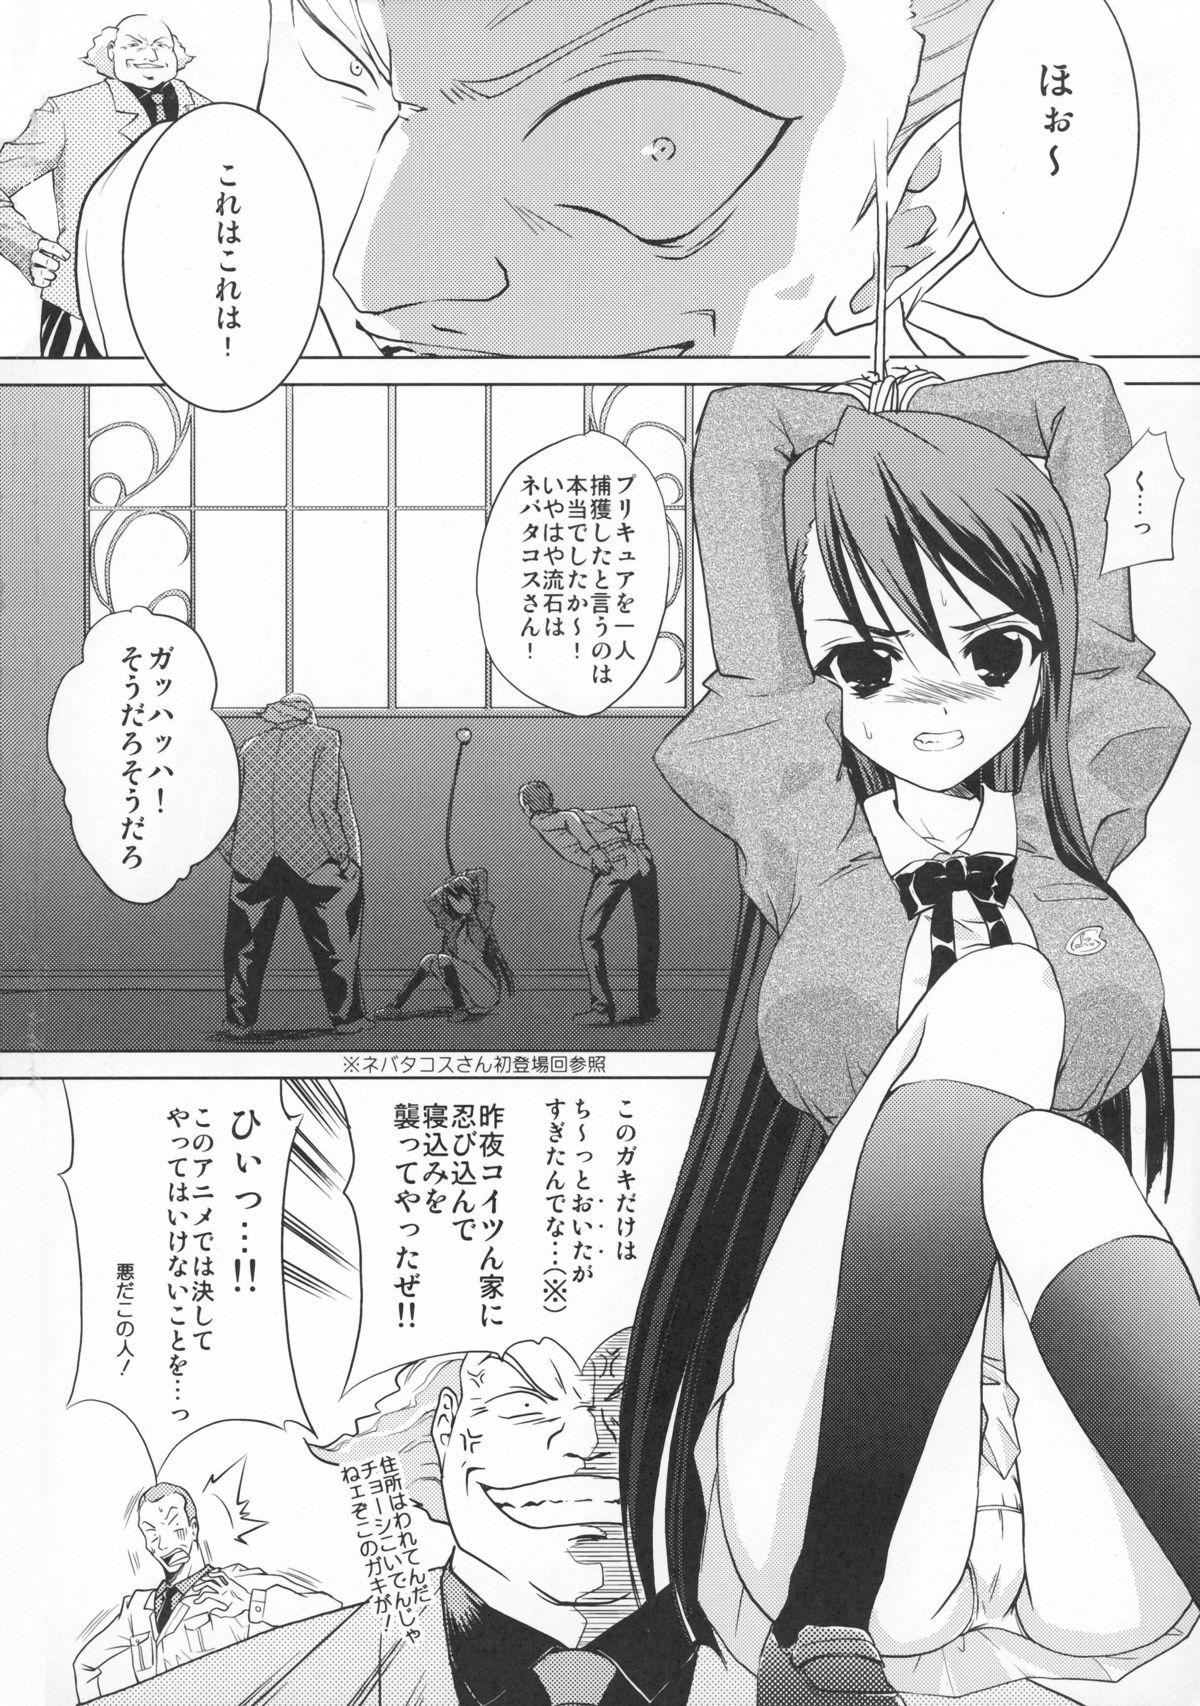 Sesso Anti-Heroine - Yes precure 5 Anal Porn - Page 4